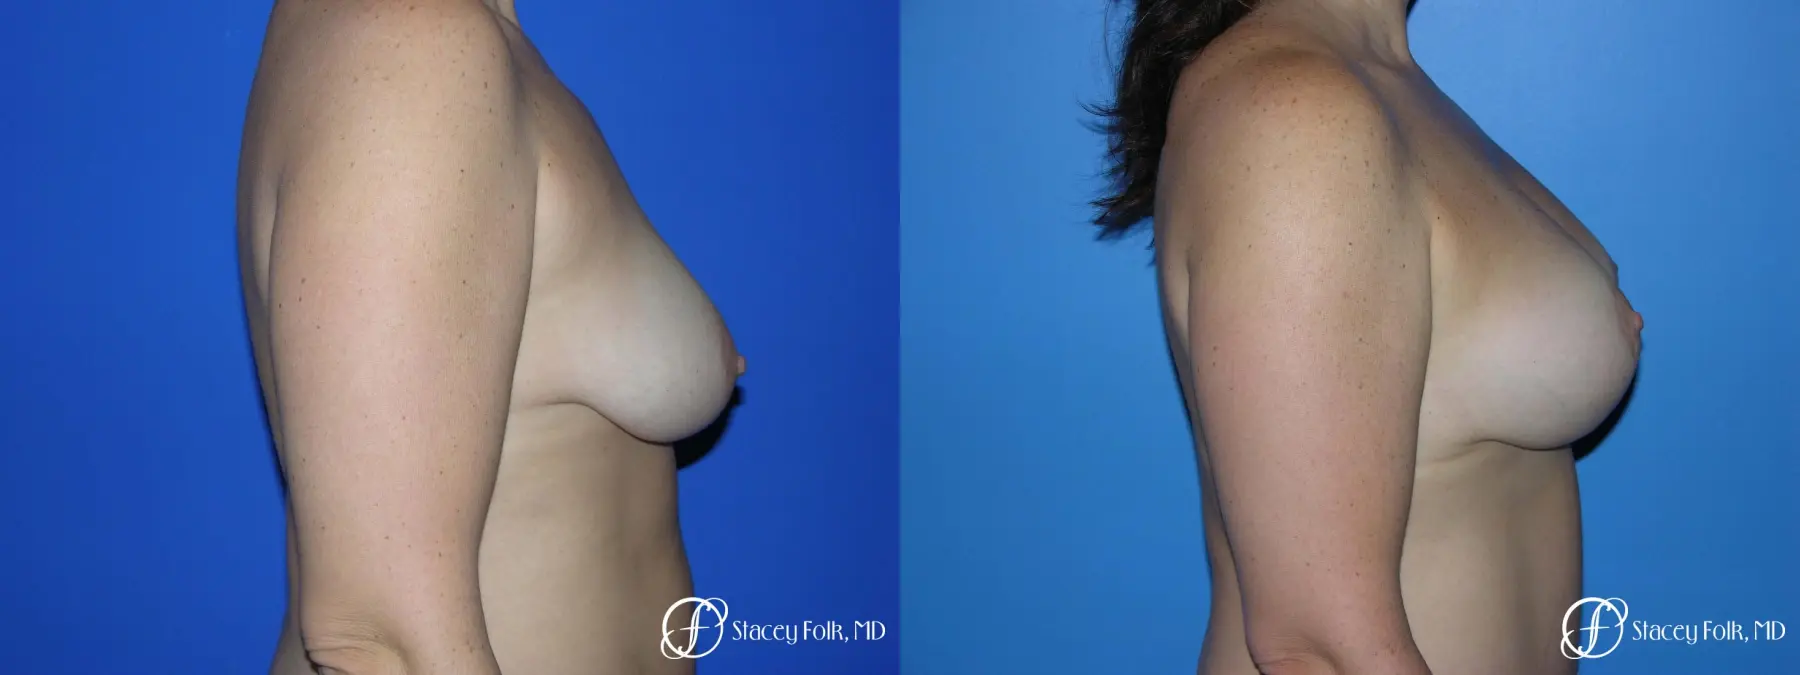 Denver Breast Lift - Mastopexy Augmentation 7989 - Before and After 3